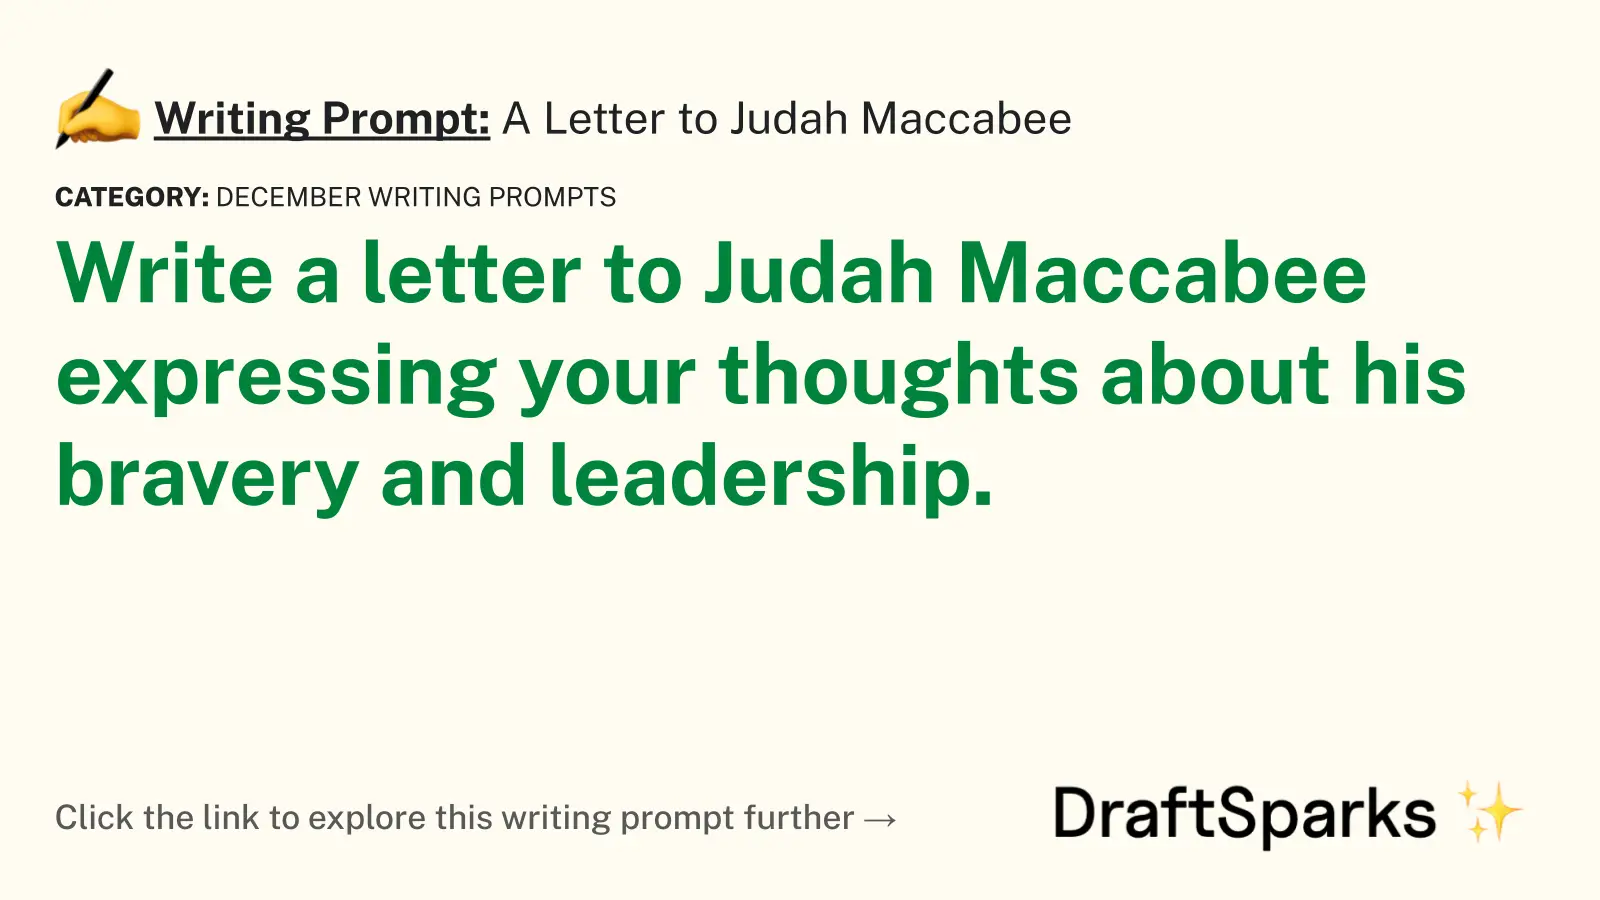 A Letter to Judah Maccabee